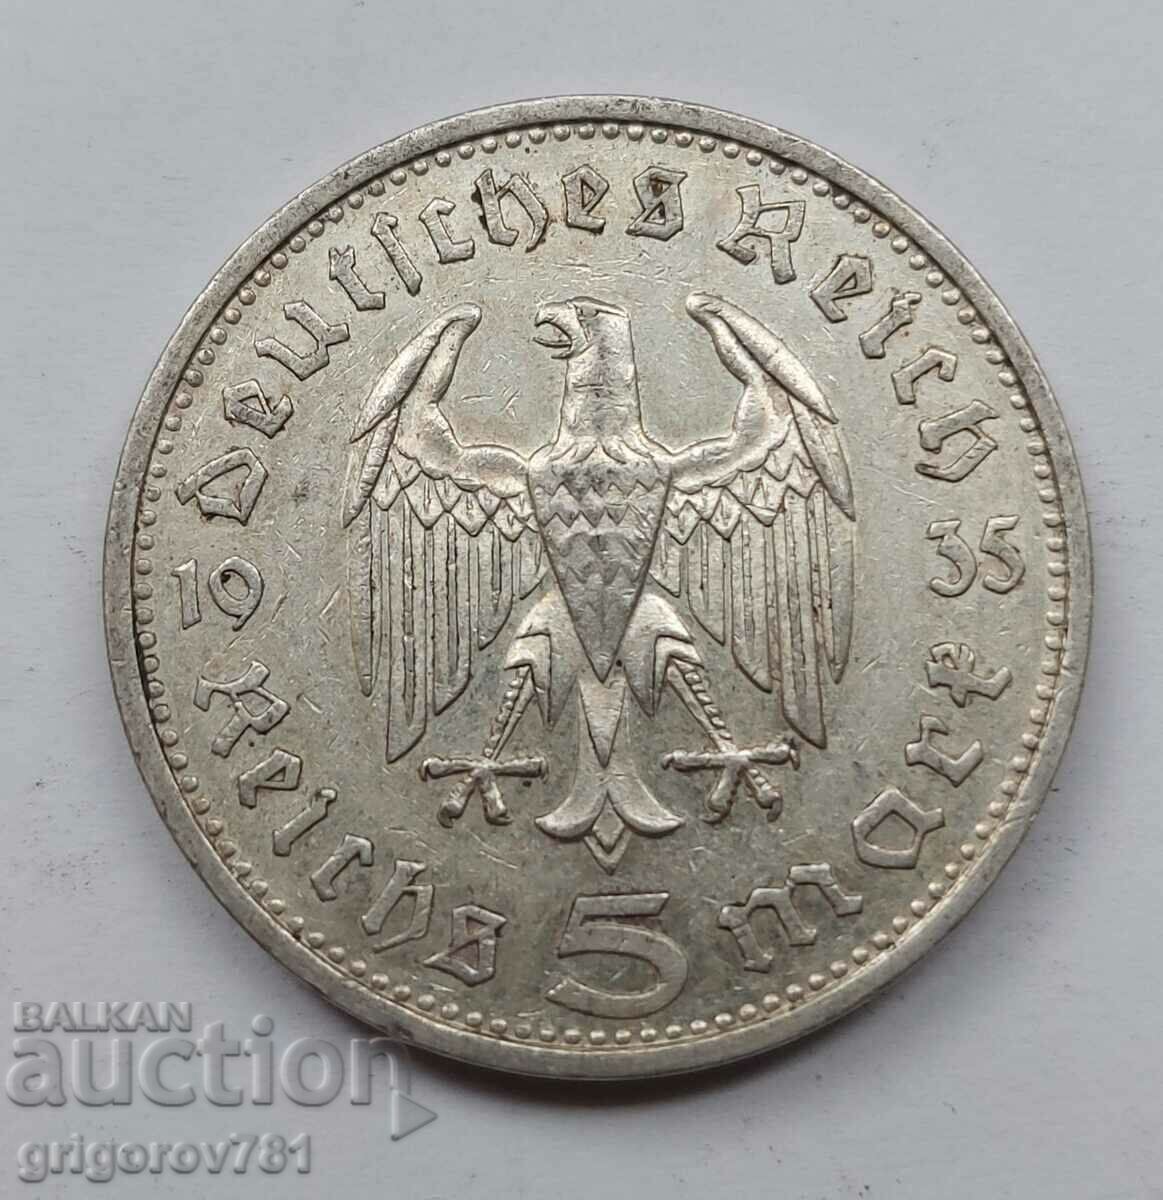 5 Mark Silver Germany 1935 G III Reich Silver Coin #16